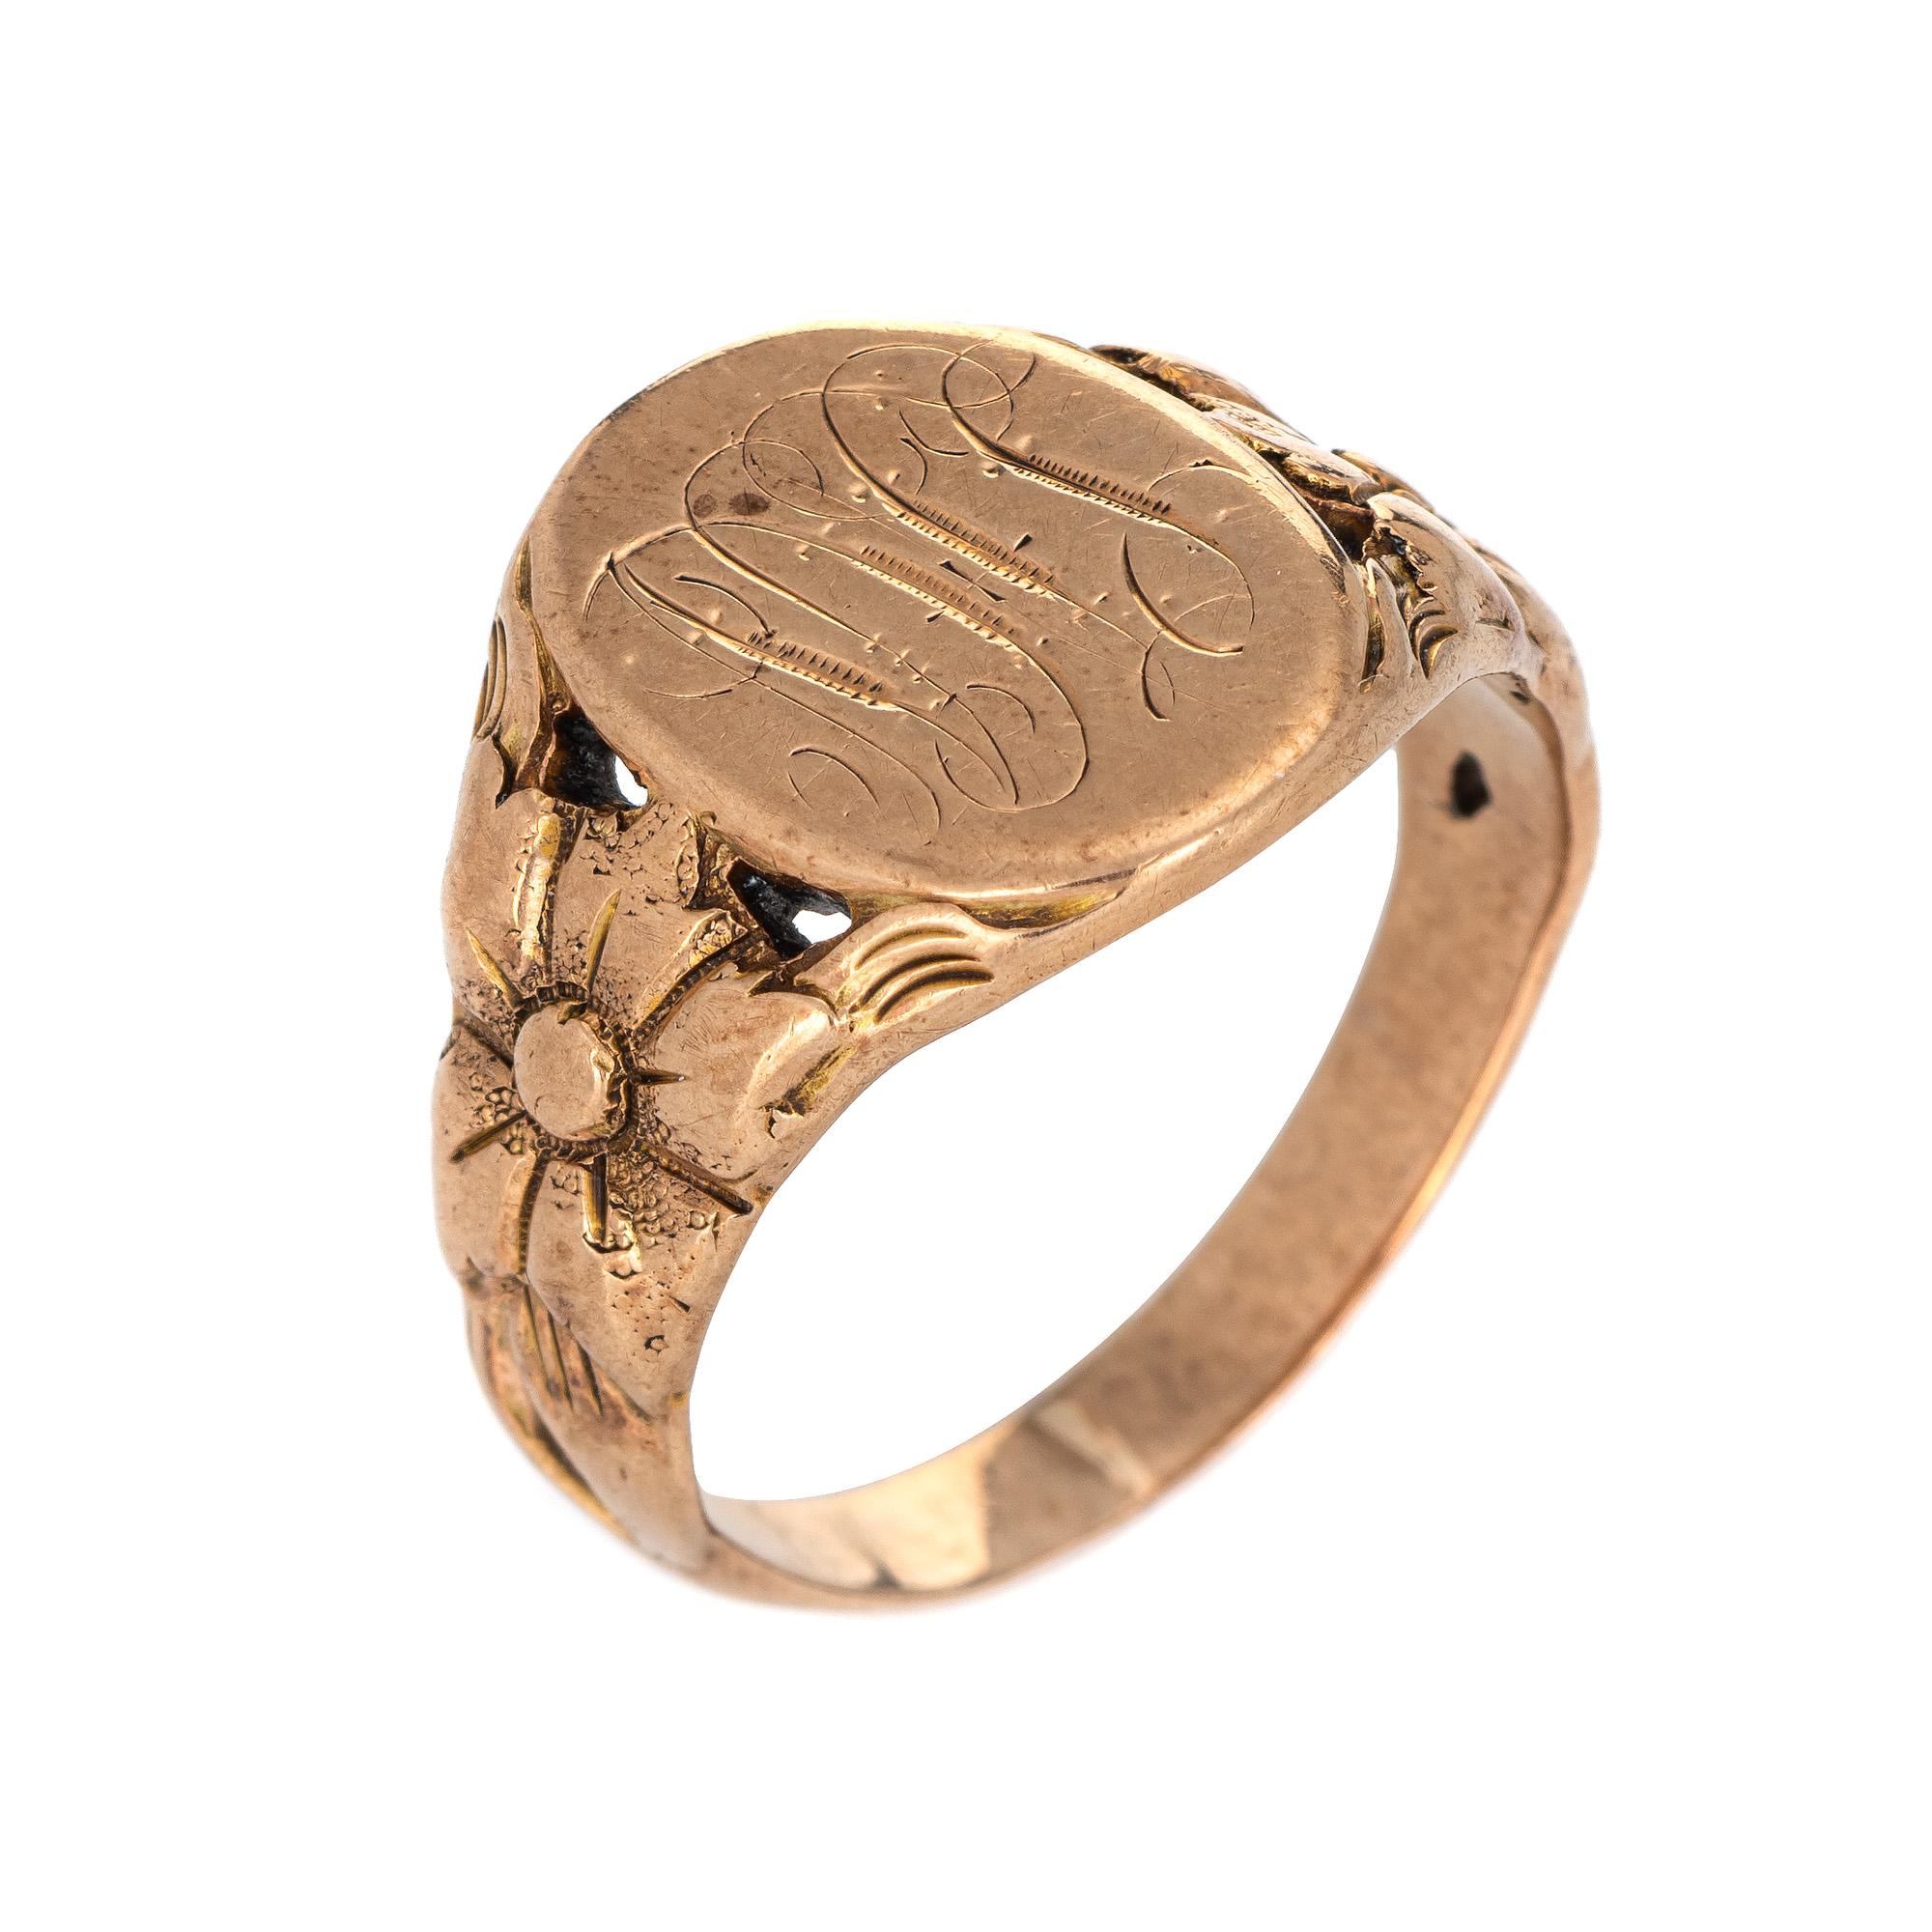 Finely detailed antique Victorian signet ring (circa 1880s to 1900s), crafted in 10 karat rose gold. 

From what we can decipher the center oval is inscribed with the initials 